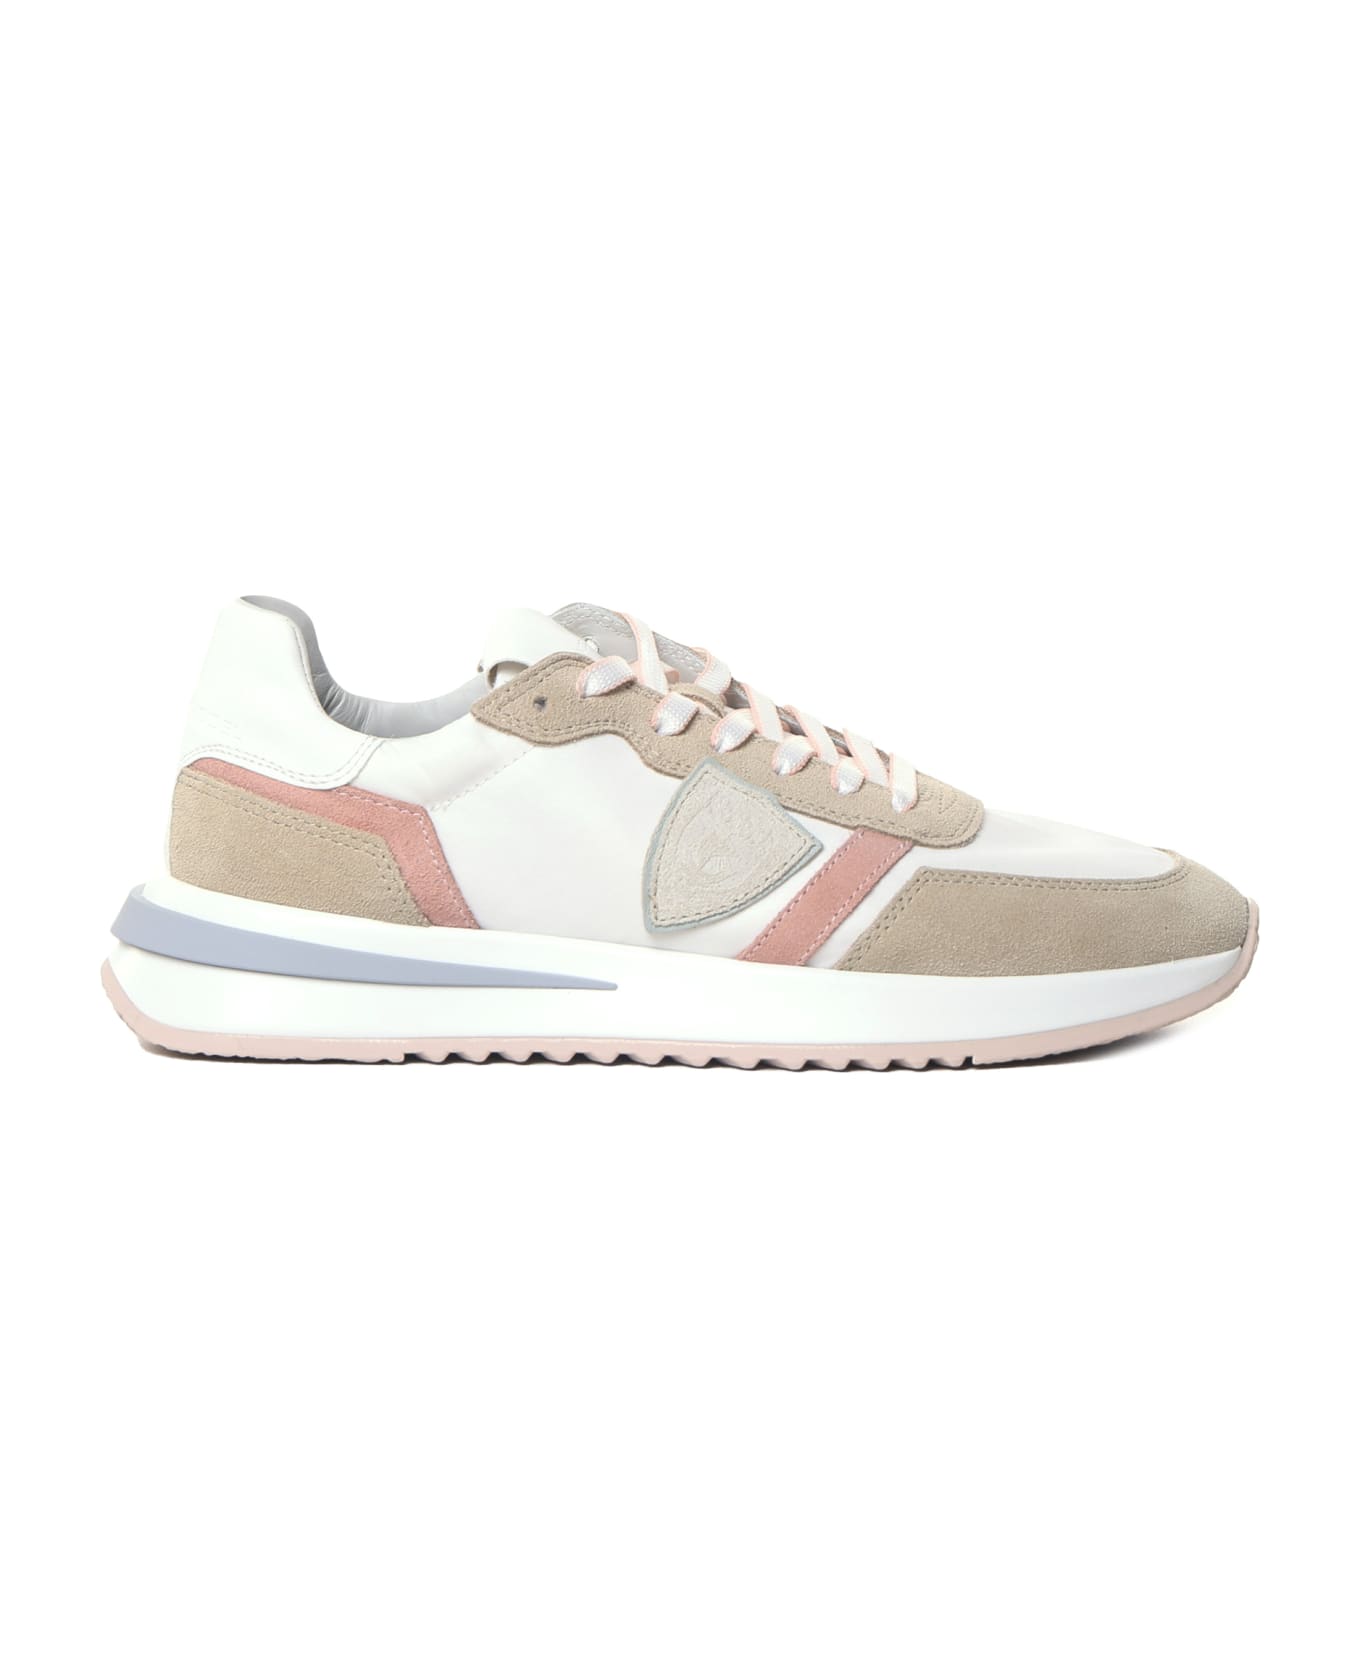 Philippe Model Fabric Sneakers - Mondial pop_blanc sable